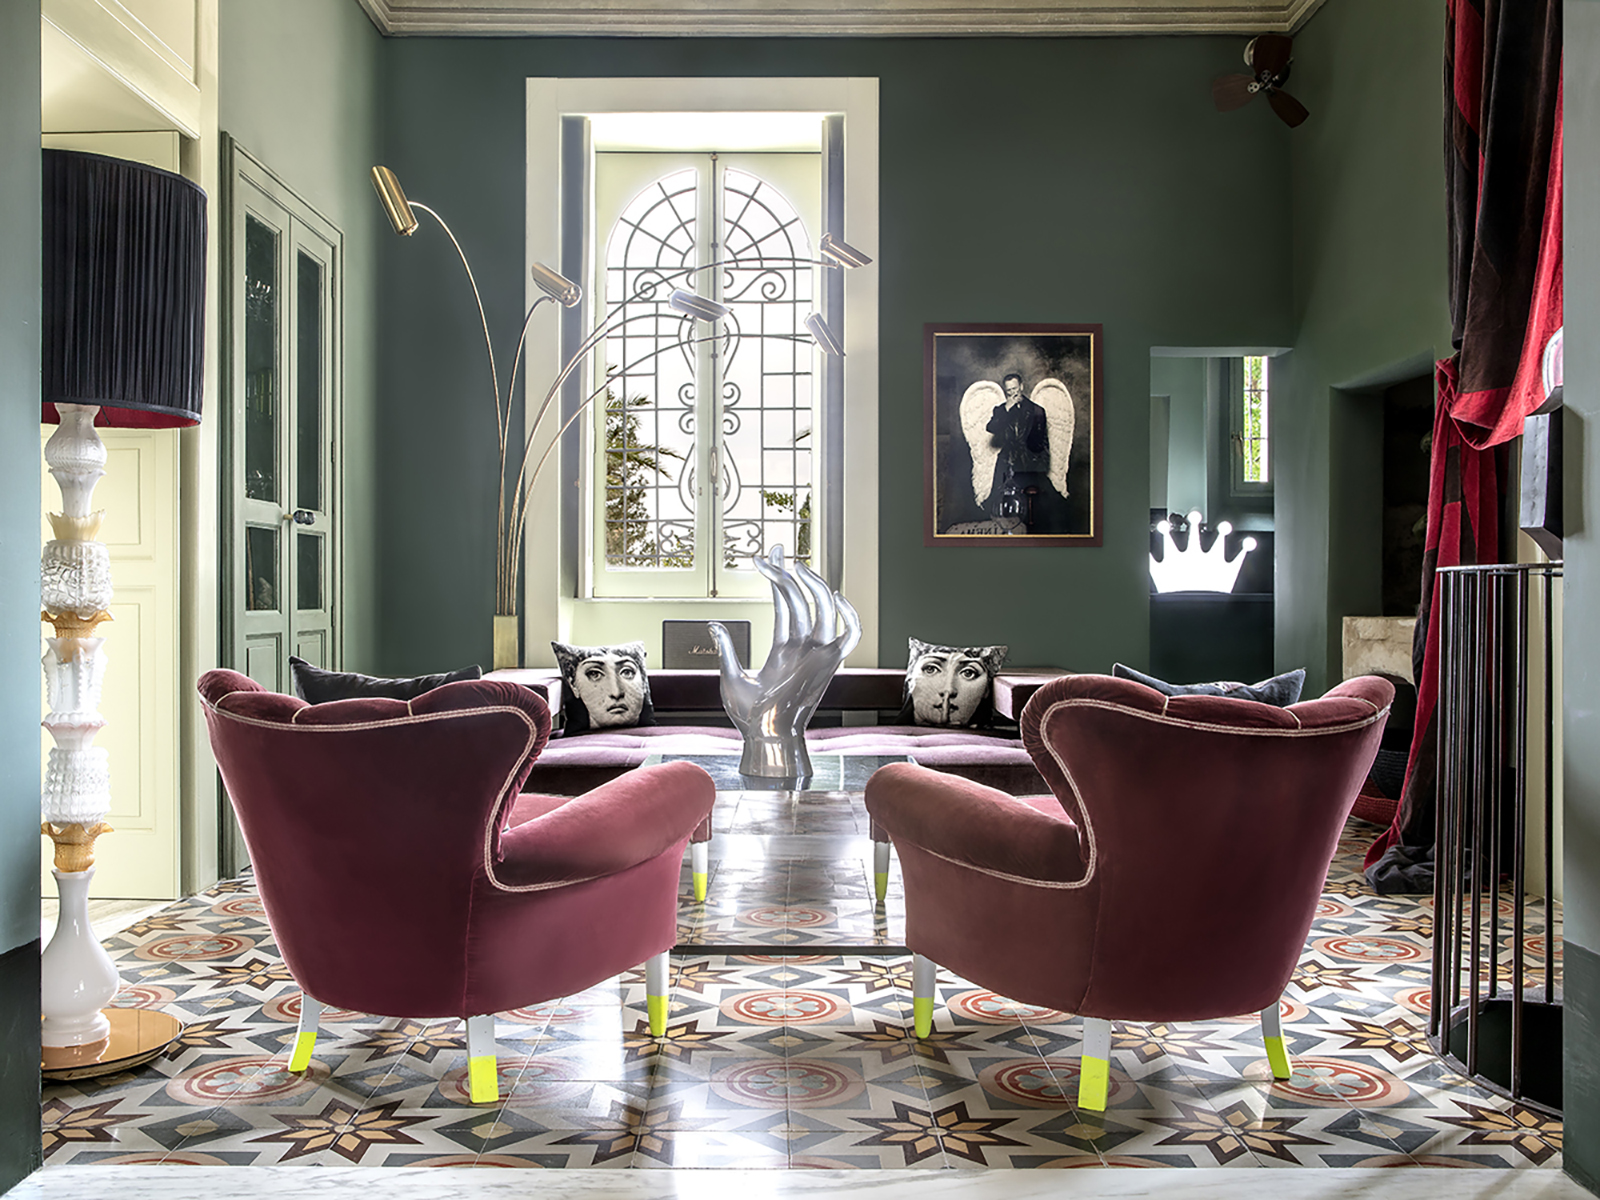 A lounge at Castle Elvira featuring a filed floor, pink velvet chairs, and green walls